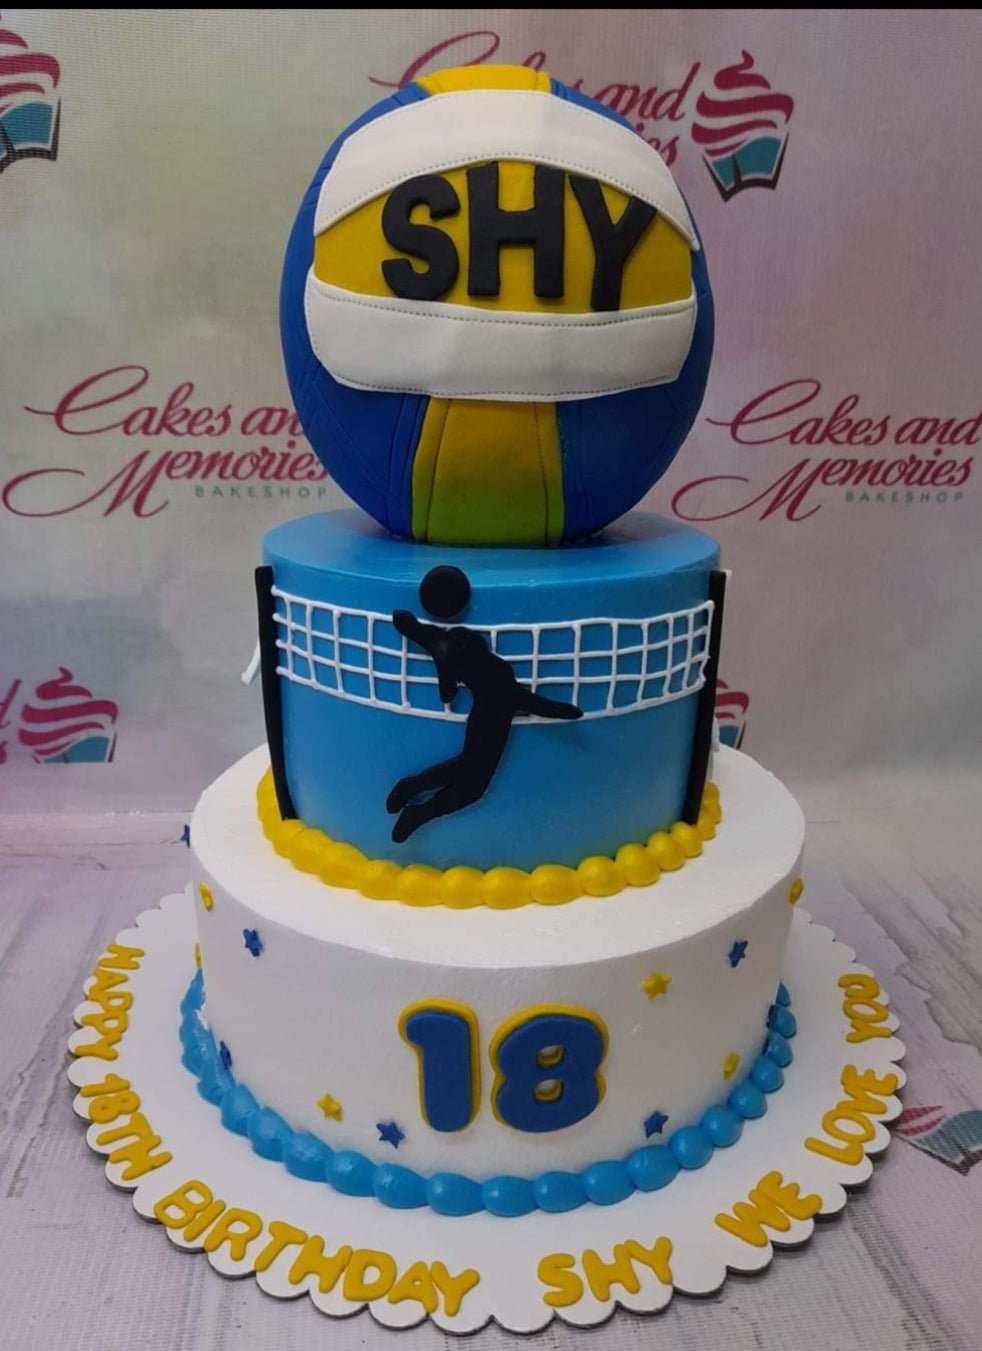 Volleyball theme cake🏐 - Sabryn's The Art of Cake's | Facebook